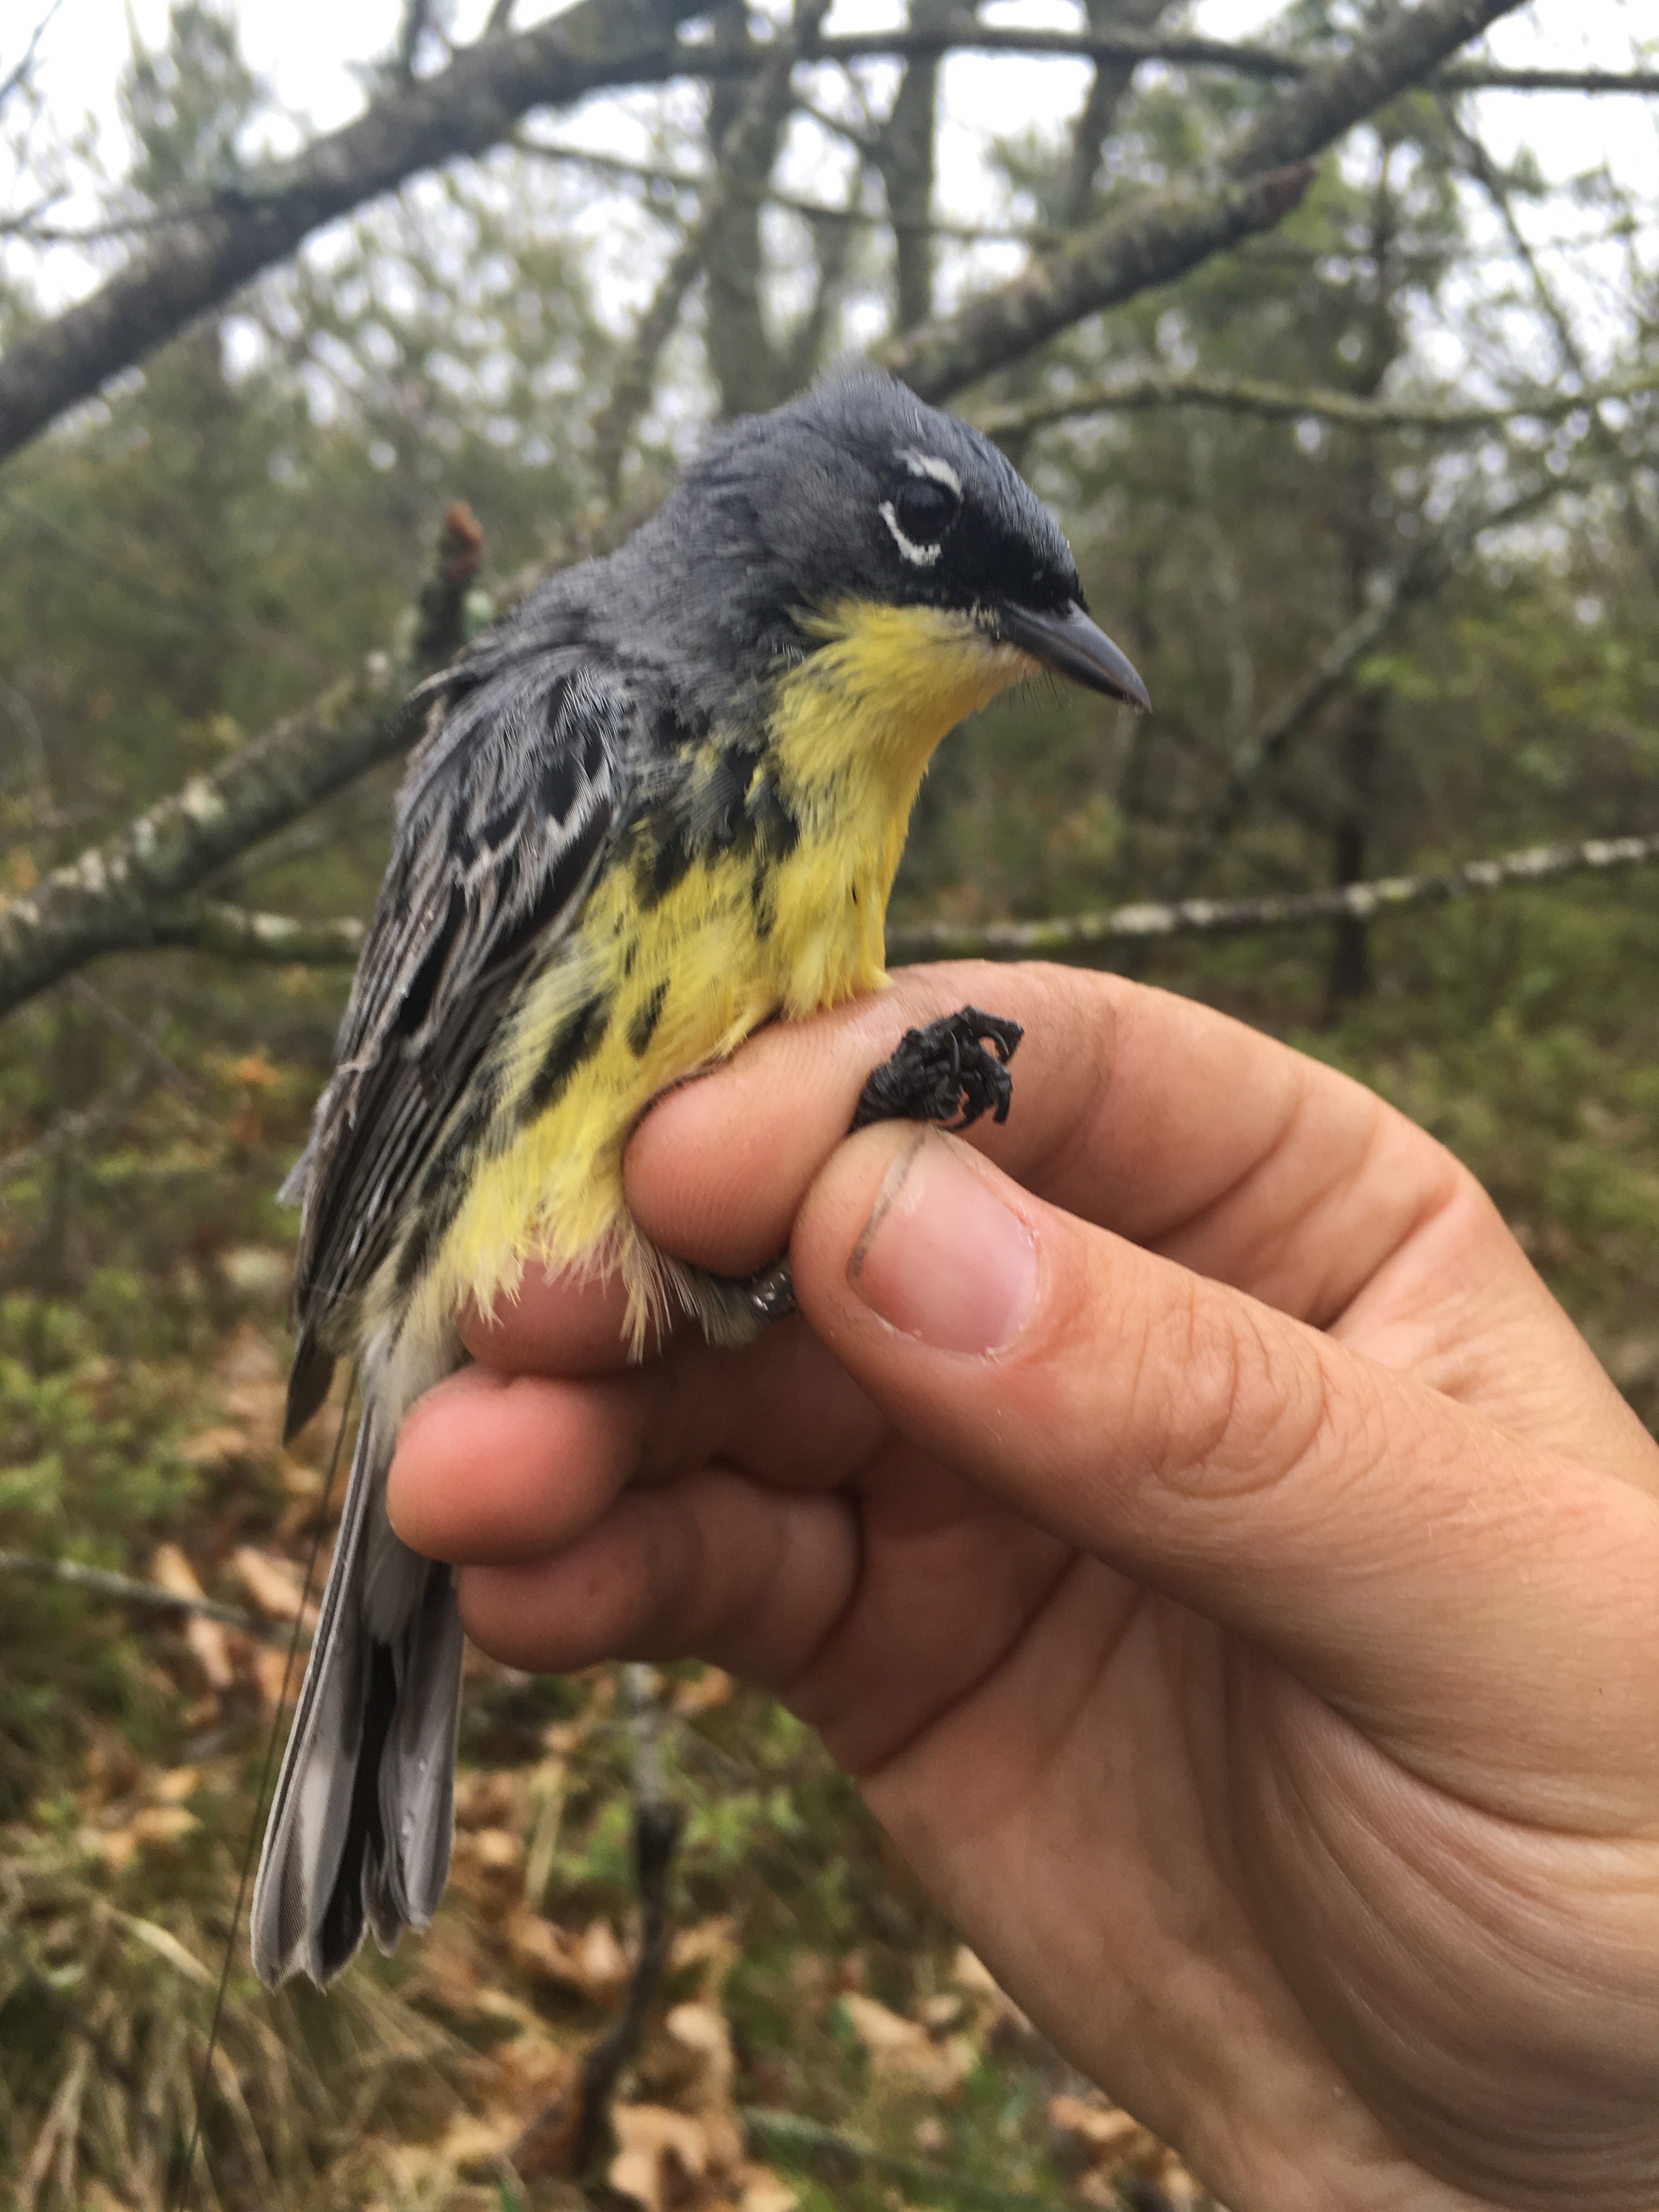 A Kirtland's warbler songbird being held in a researcher's hand after being fitted with a GPS tracker